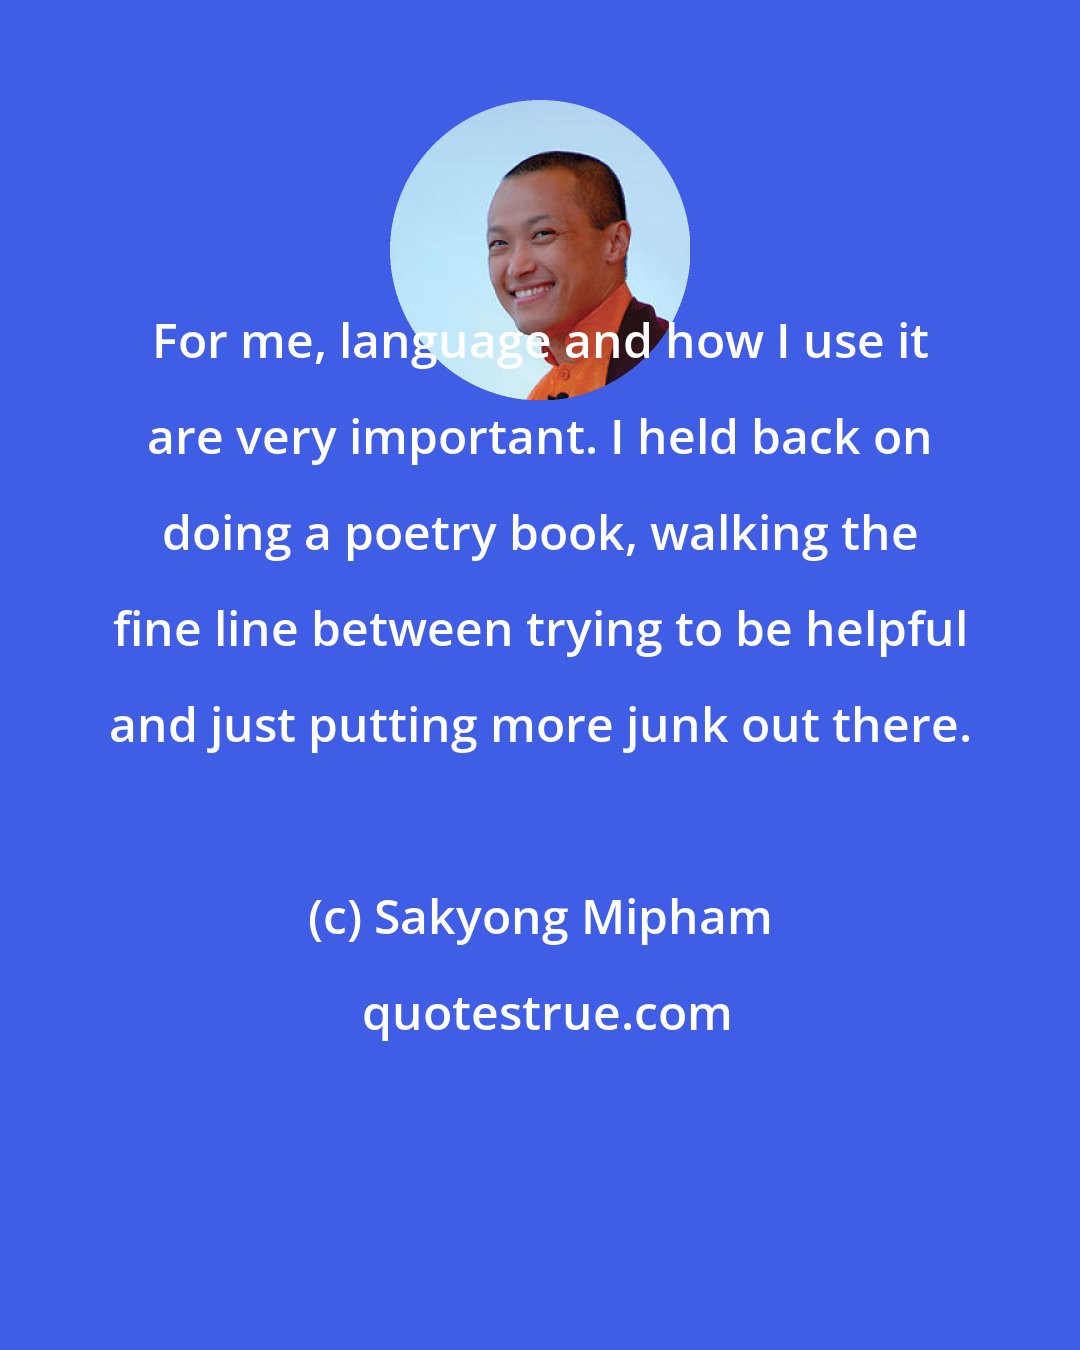 Sakyong Mipham: For me, language and how I use it are very important. I held back on doing a poetry book, walking the fine line between trying to be helpful and just putting more junk out there.